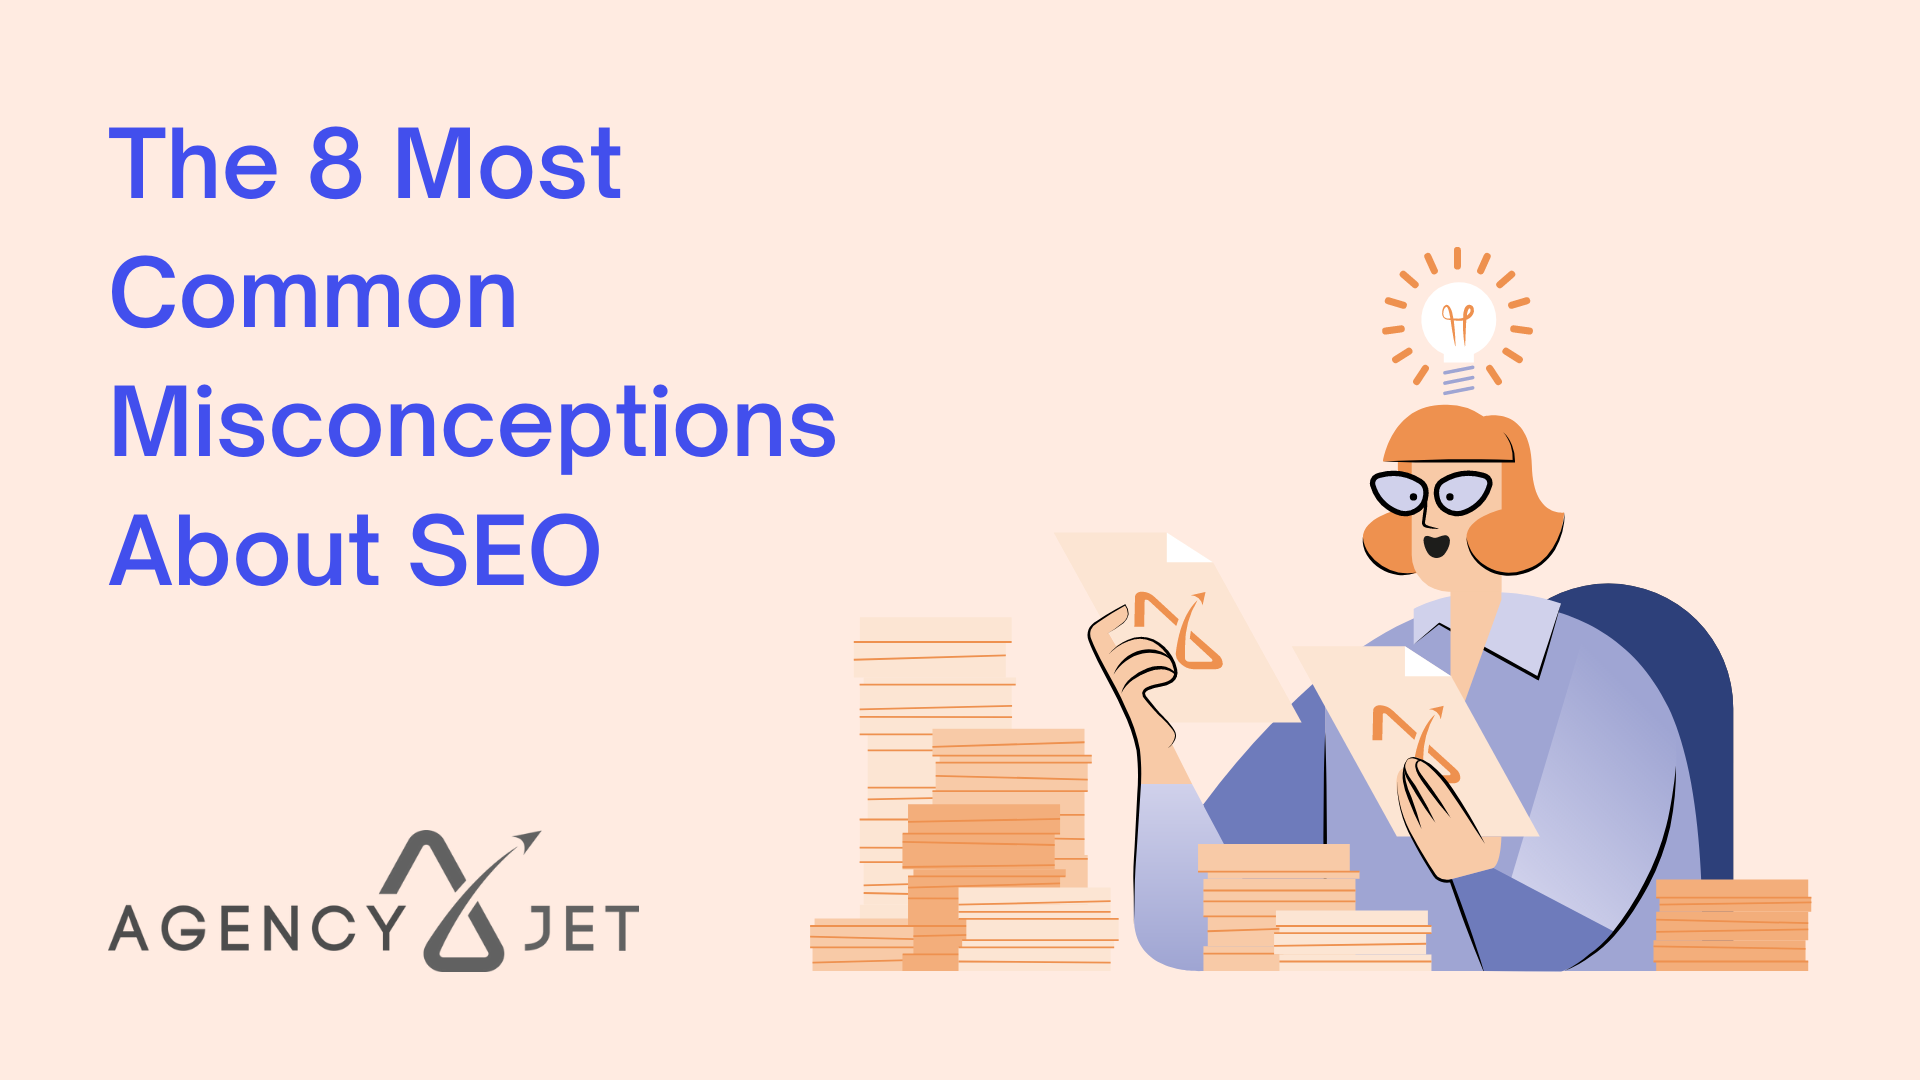 The 8 Most Common Misconceptions About SEO - Agency Jet (1)